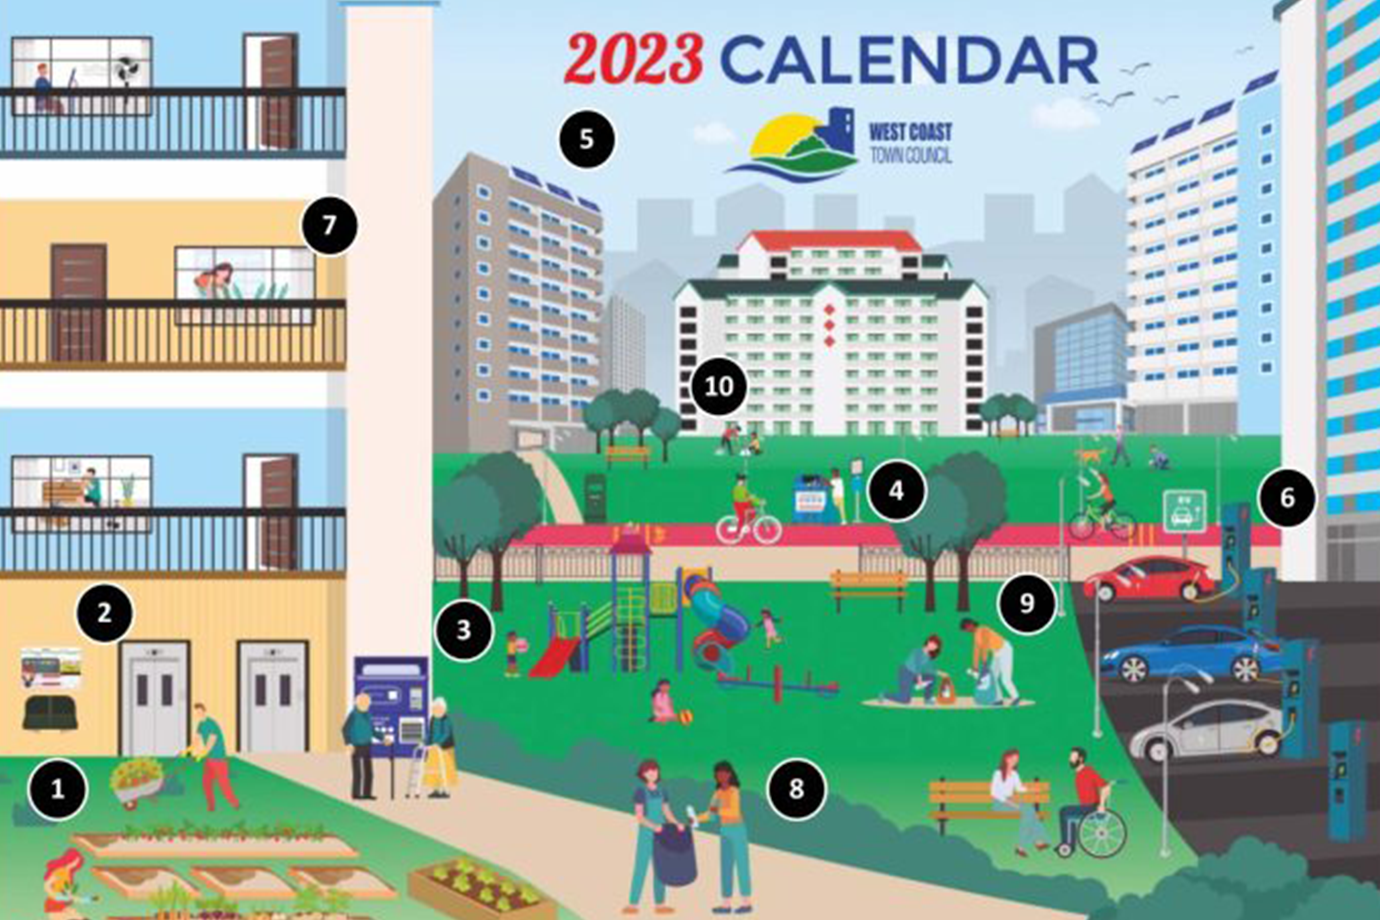 Can you spot the number of sustainable elements in our 2023 Calendar? Click in to find out more!